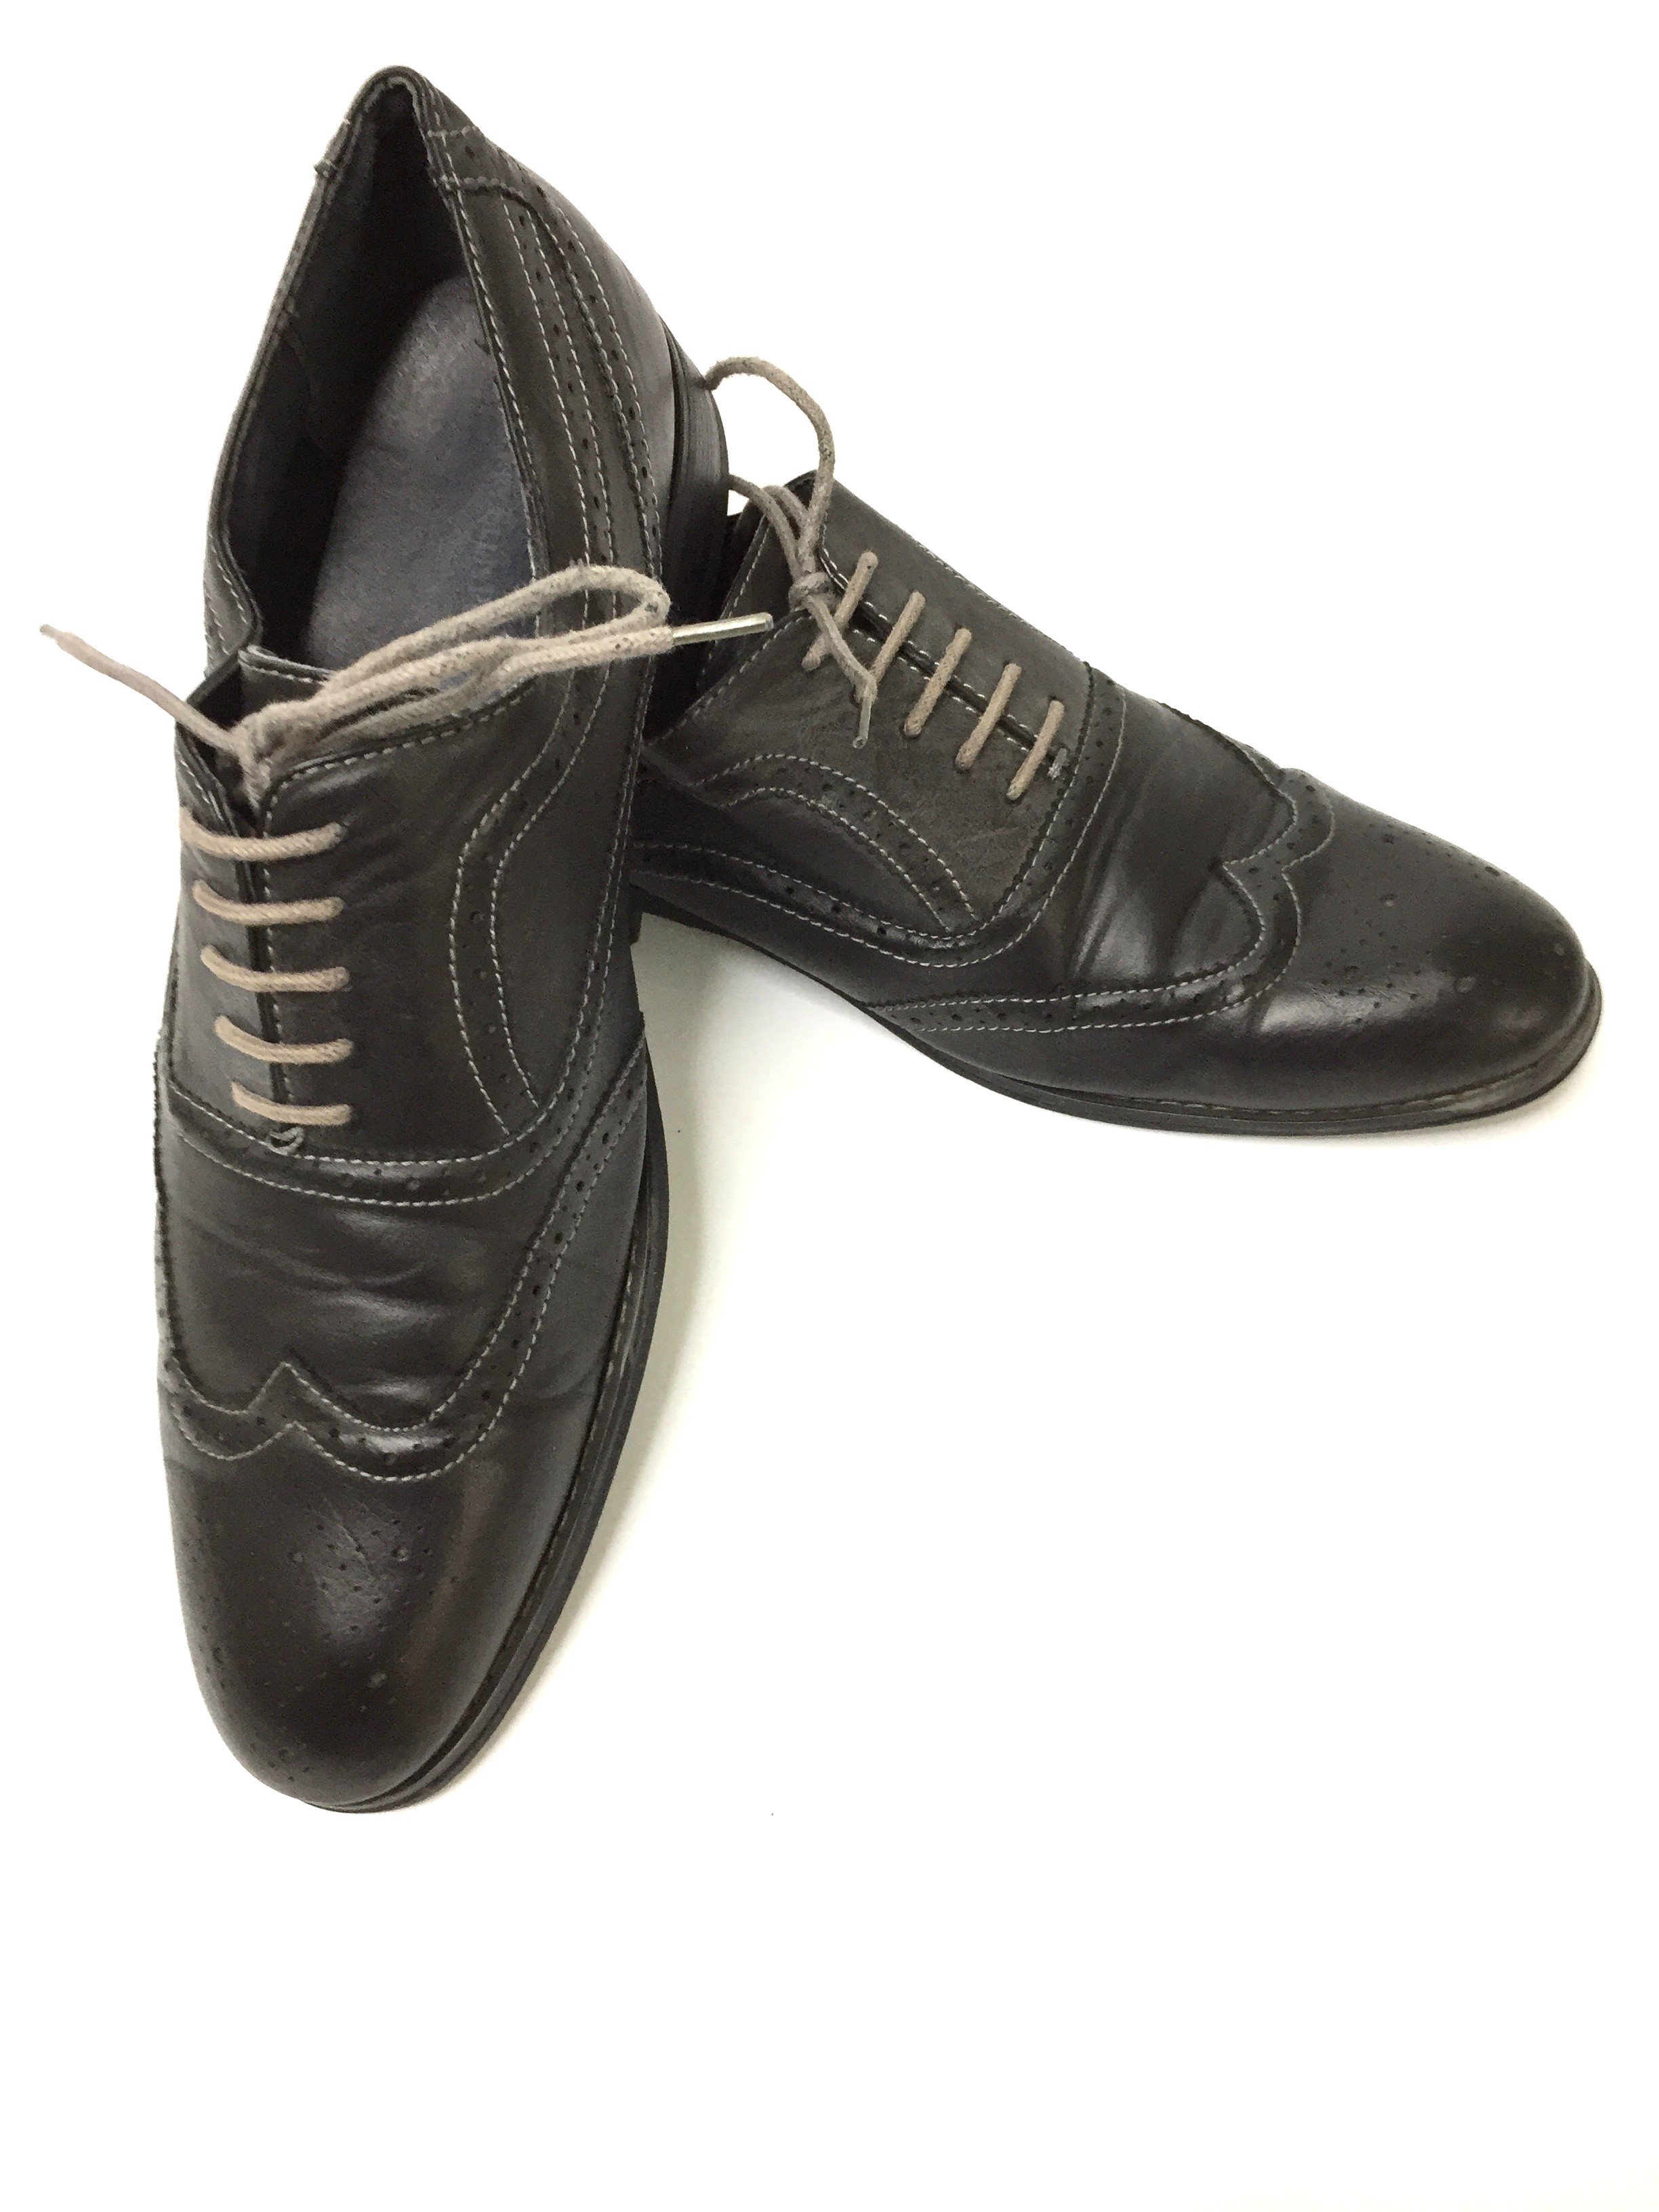 1990's Vintage Nash Shoes: 90s -Nash- Mens black smooth faux leather  wingtip style brogues oxfords with sawtooth perforated wingtip front,  sides, vamp, and back details, five eyelet lacing, faux leather lining,  vinyl